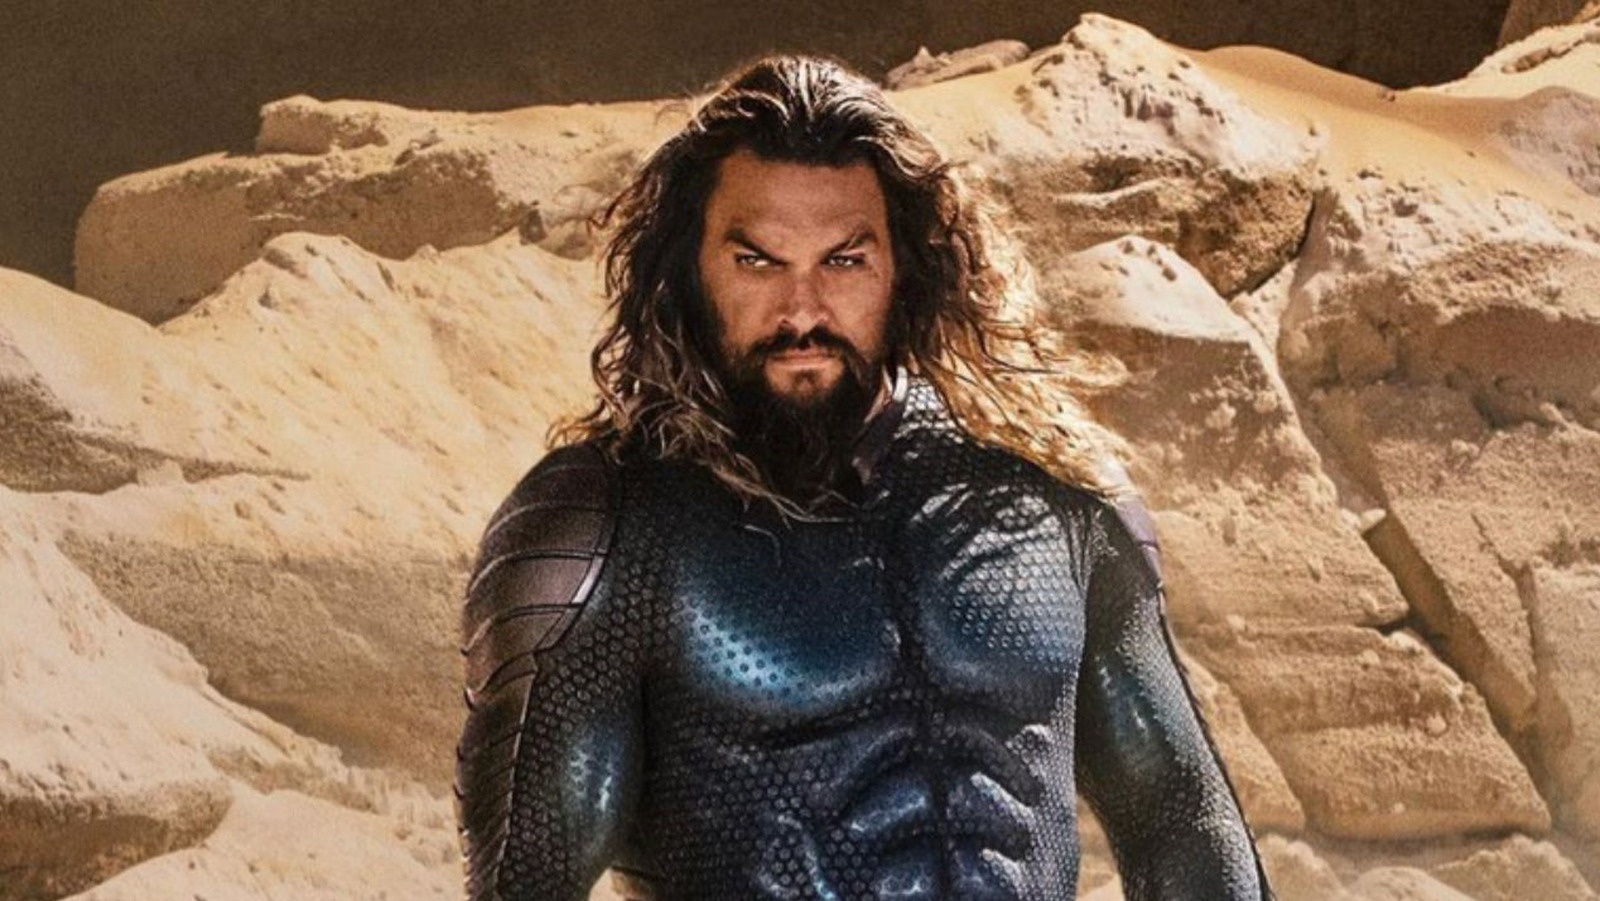 Blonde Hair Rumored for New Aquaman Character in Sequel - wide 3